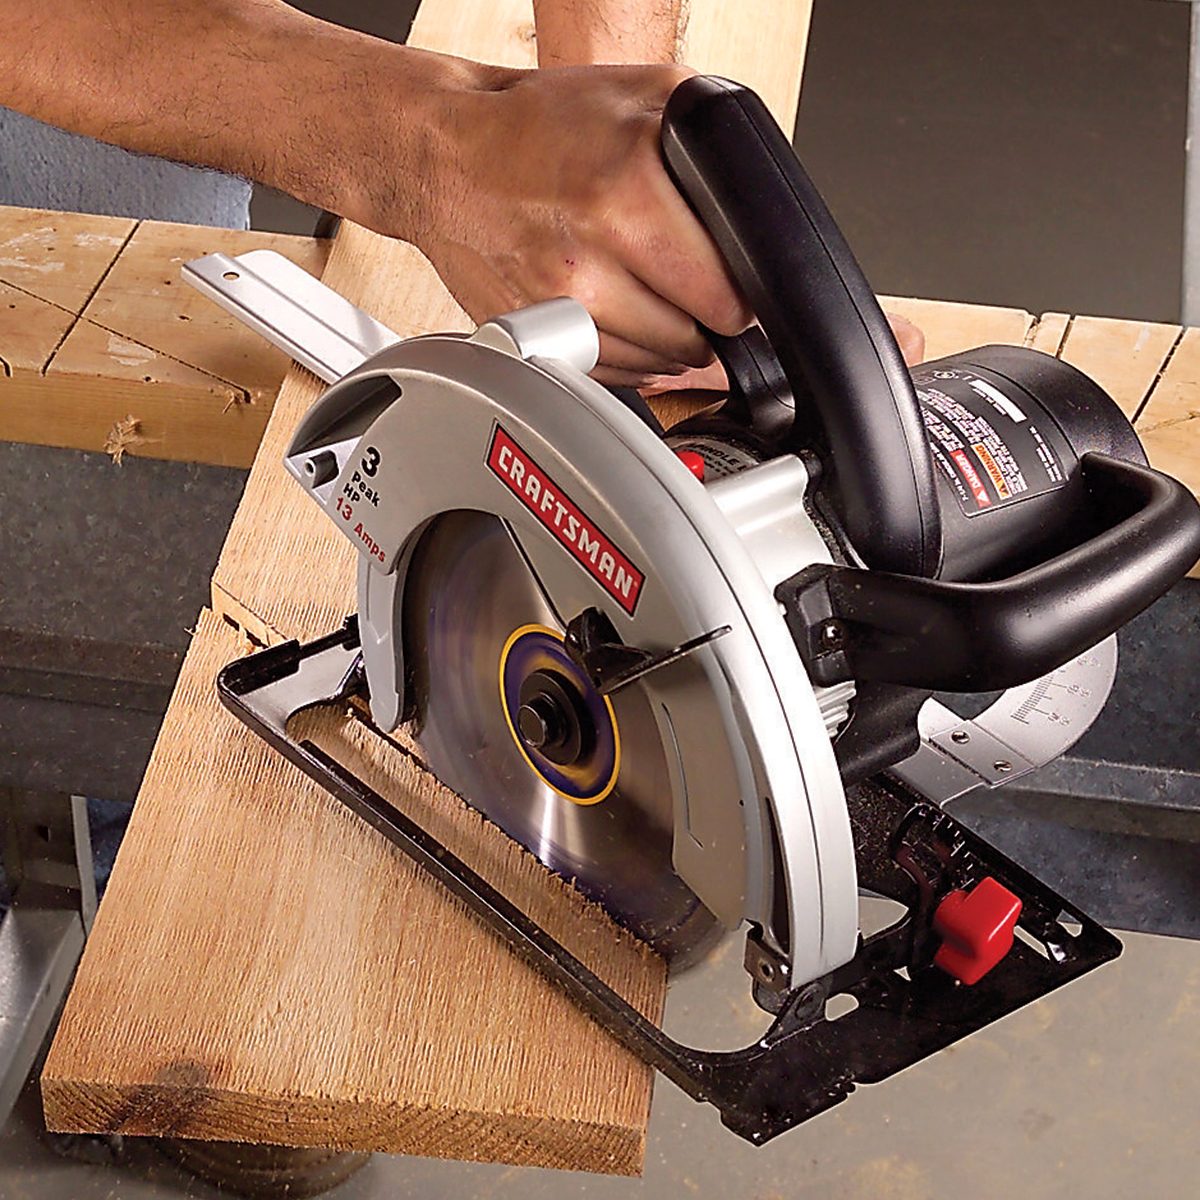 How To Make Angle Cuts With A Circular Saw Fh05jun 459 07 015